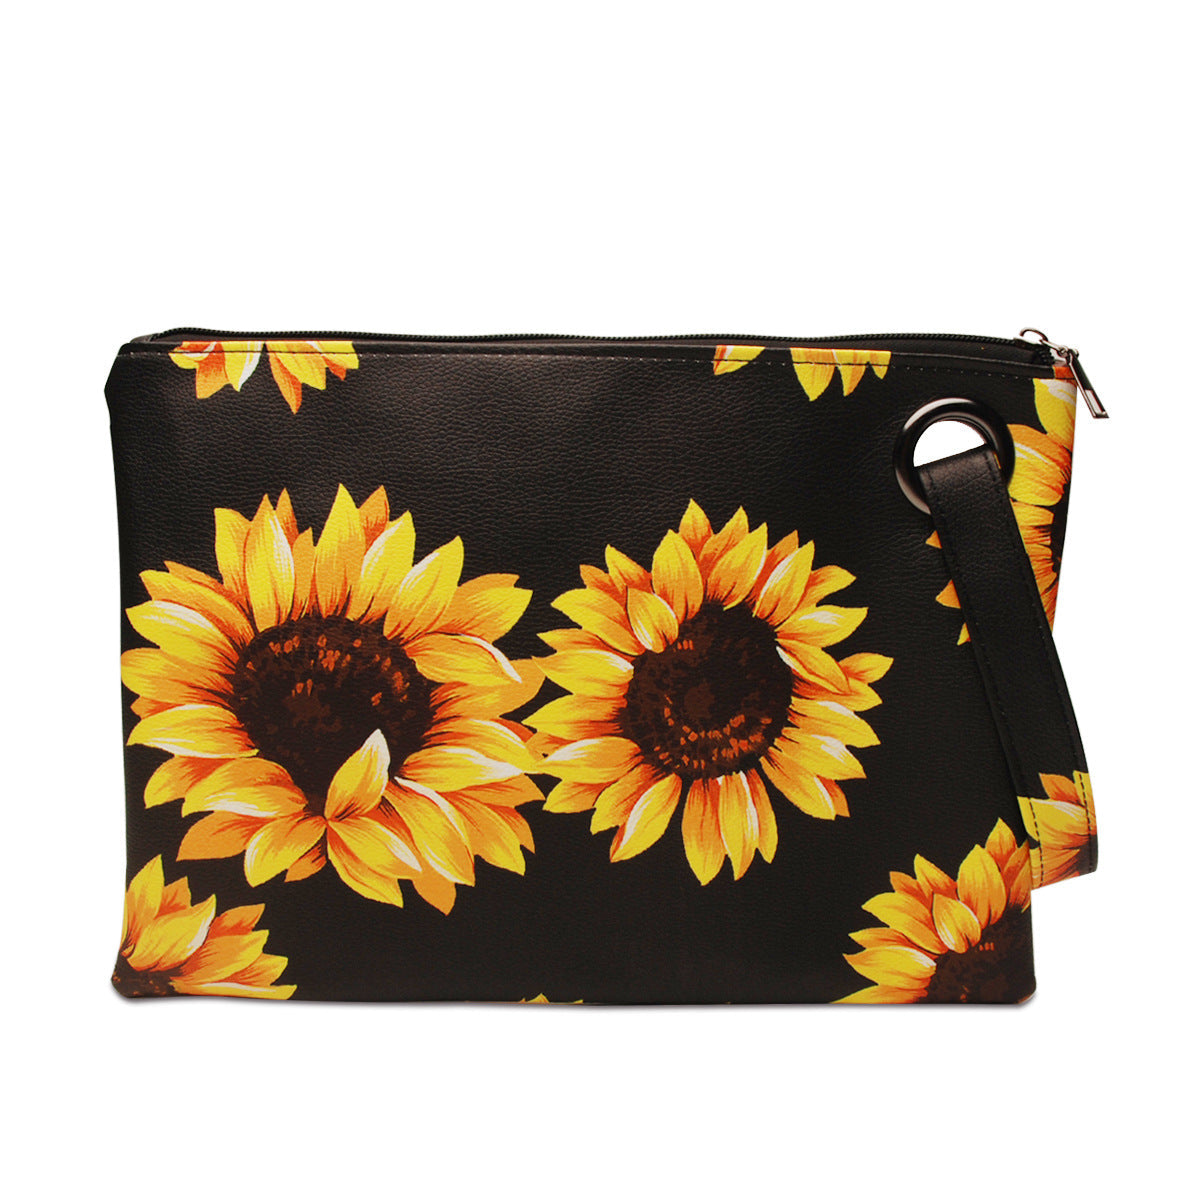 Women Sunflower Print Pu Leather Evening Clutch Bags-Handbags, Wallets & Cases-Black Sunflower-Free Shipping Leatheretro